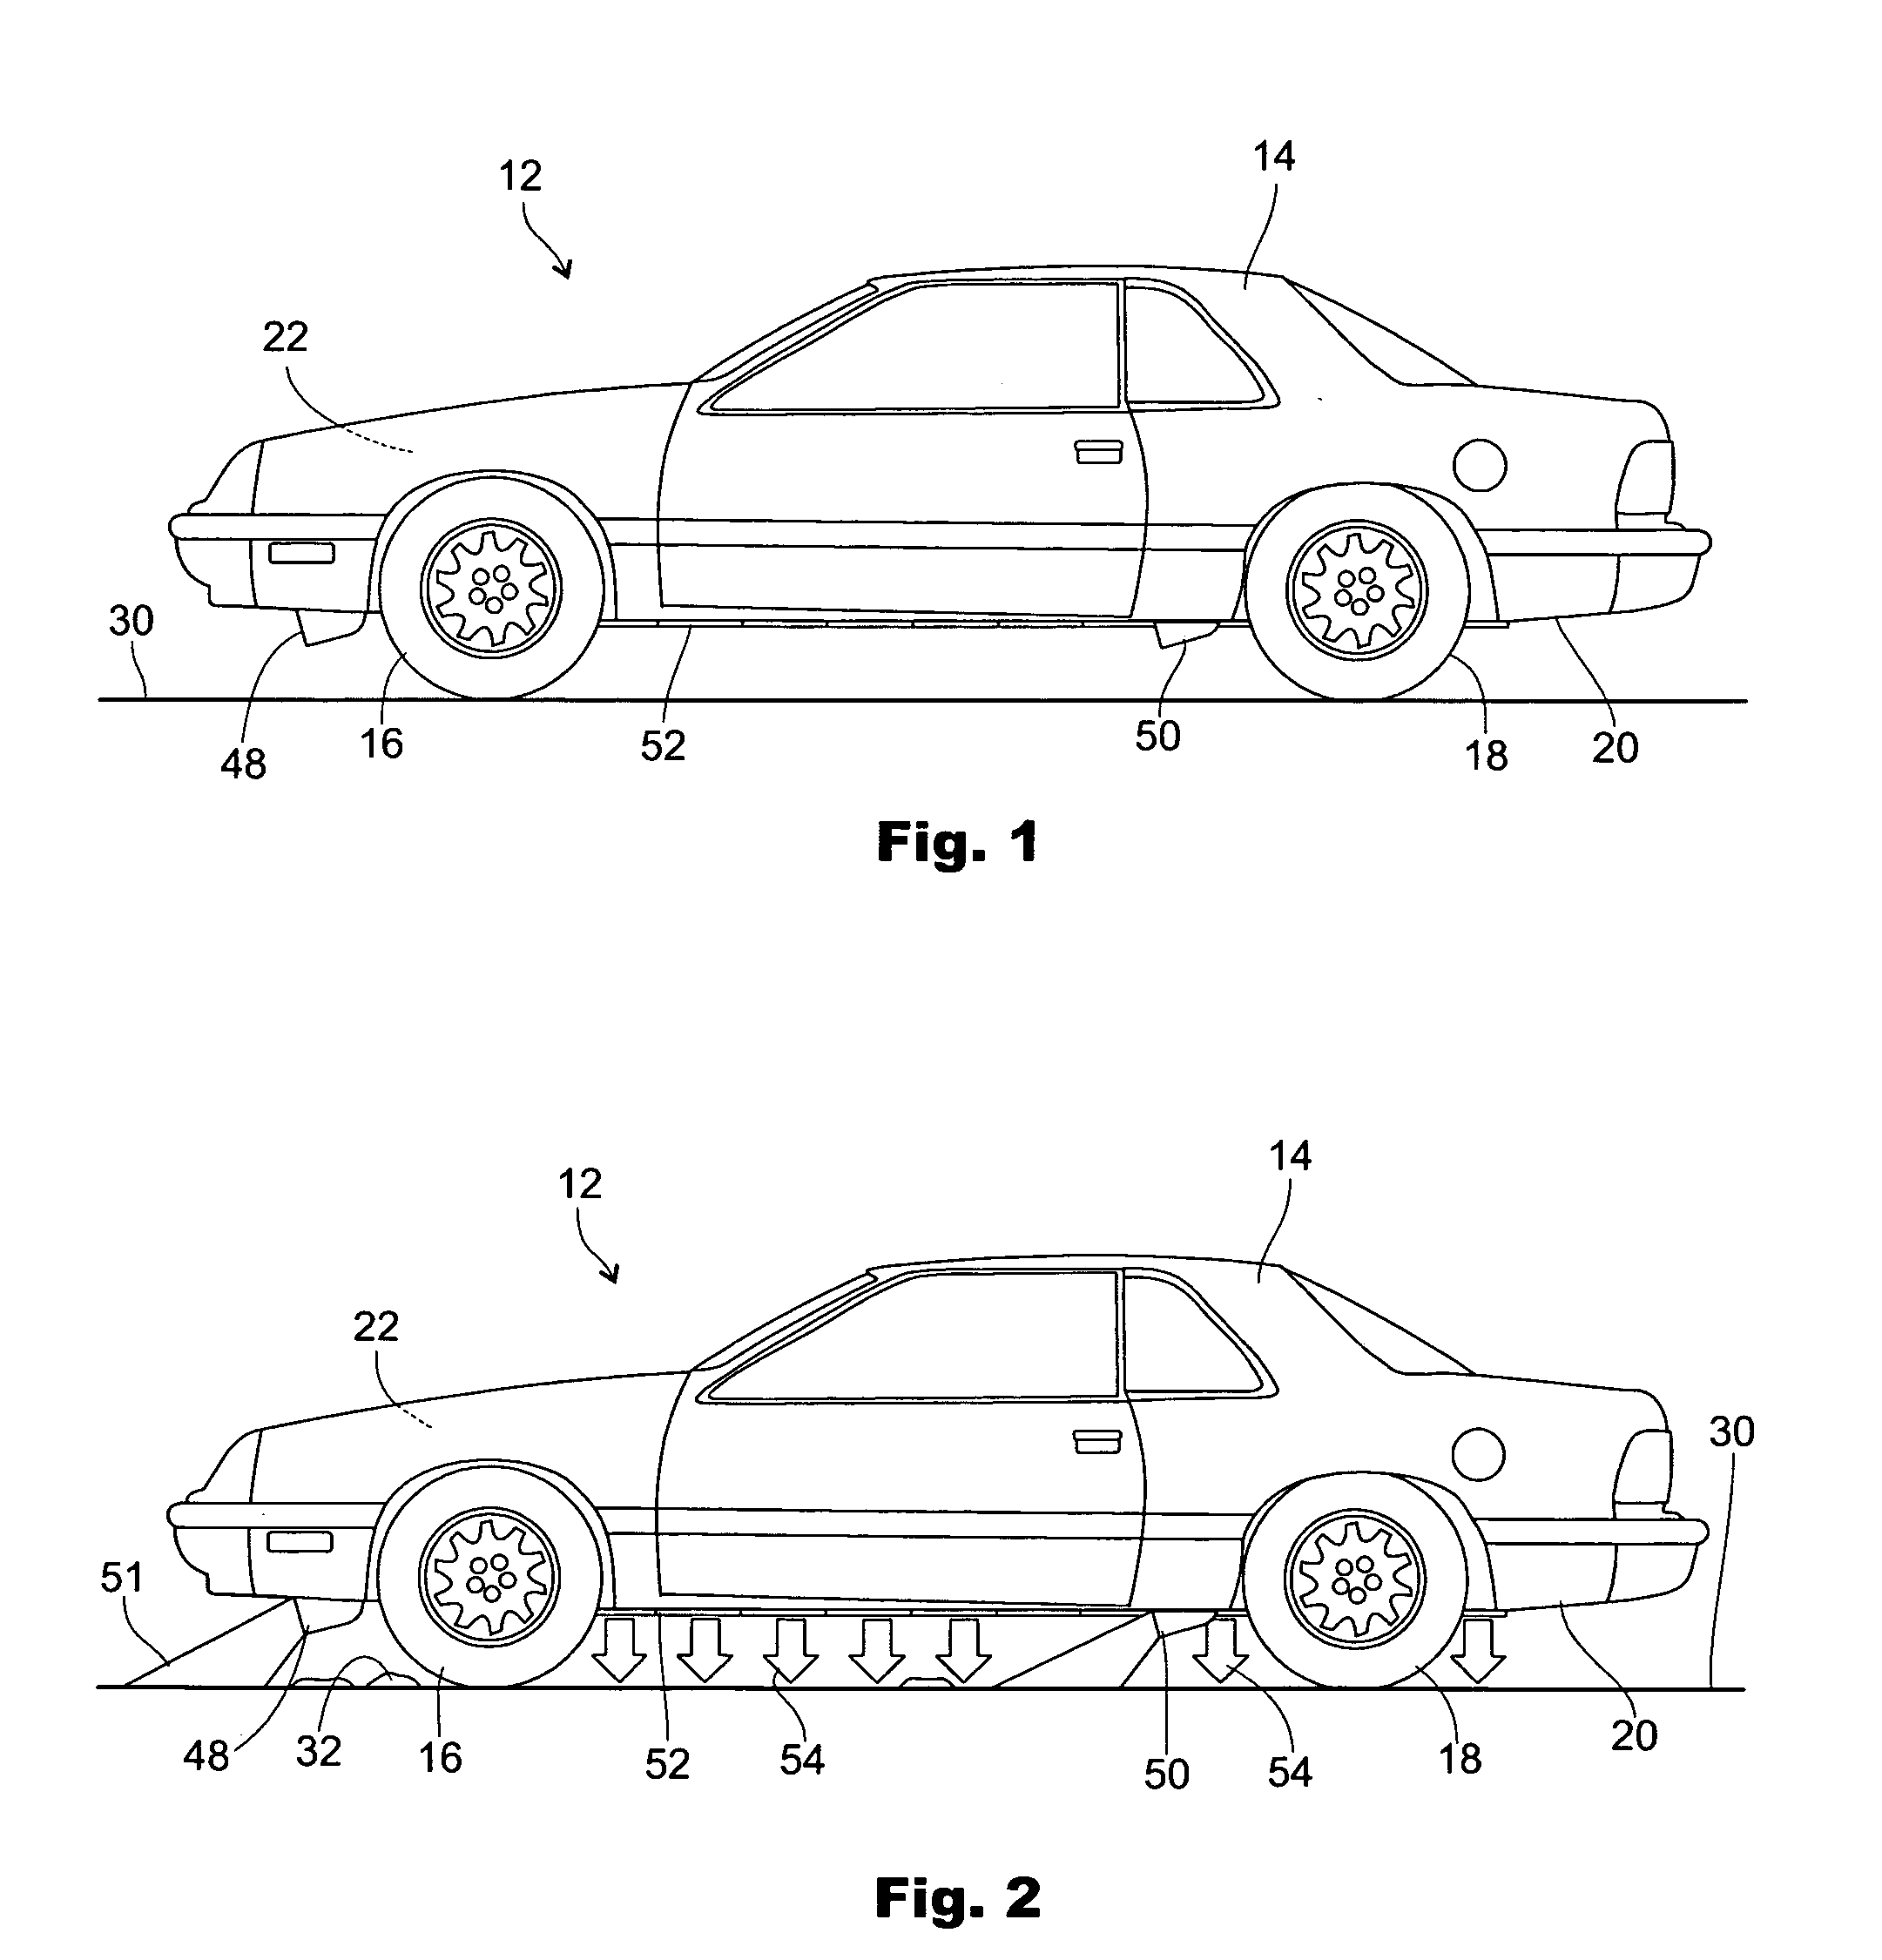 Automotive safety device for melting snow and ice from roadways